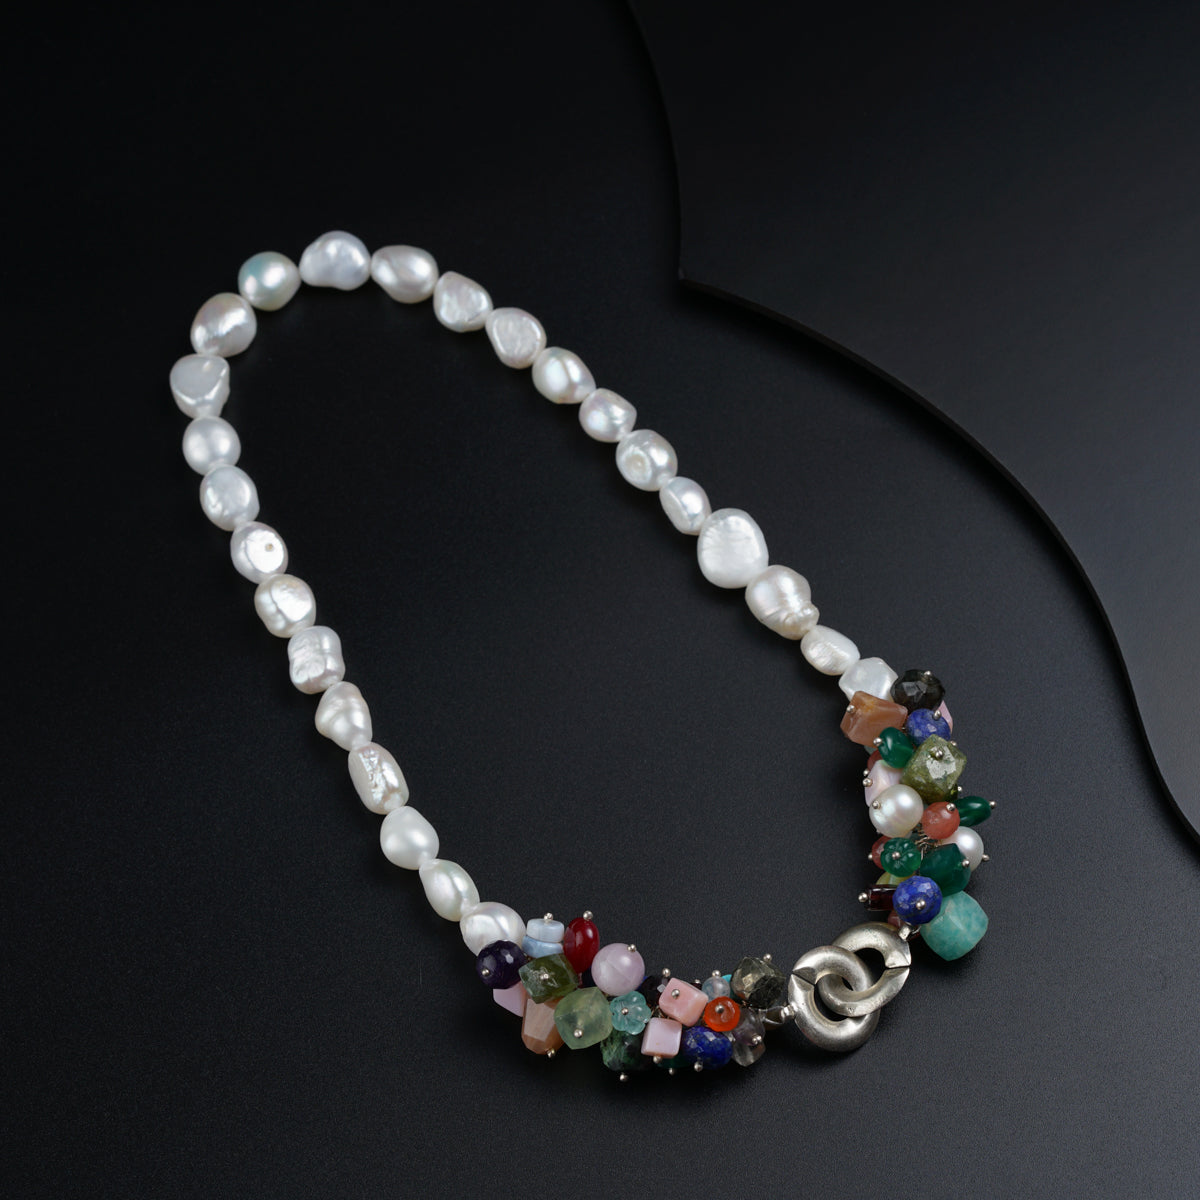 a necklace with pearls, beads, and charms on a black surface